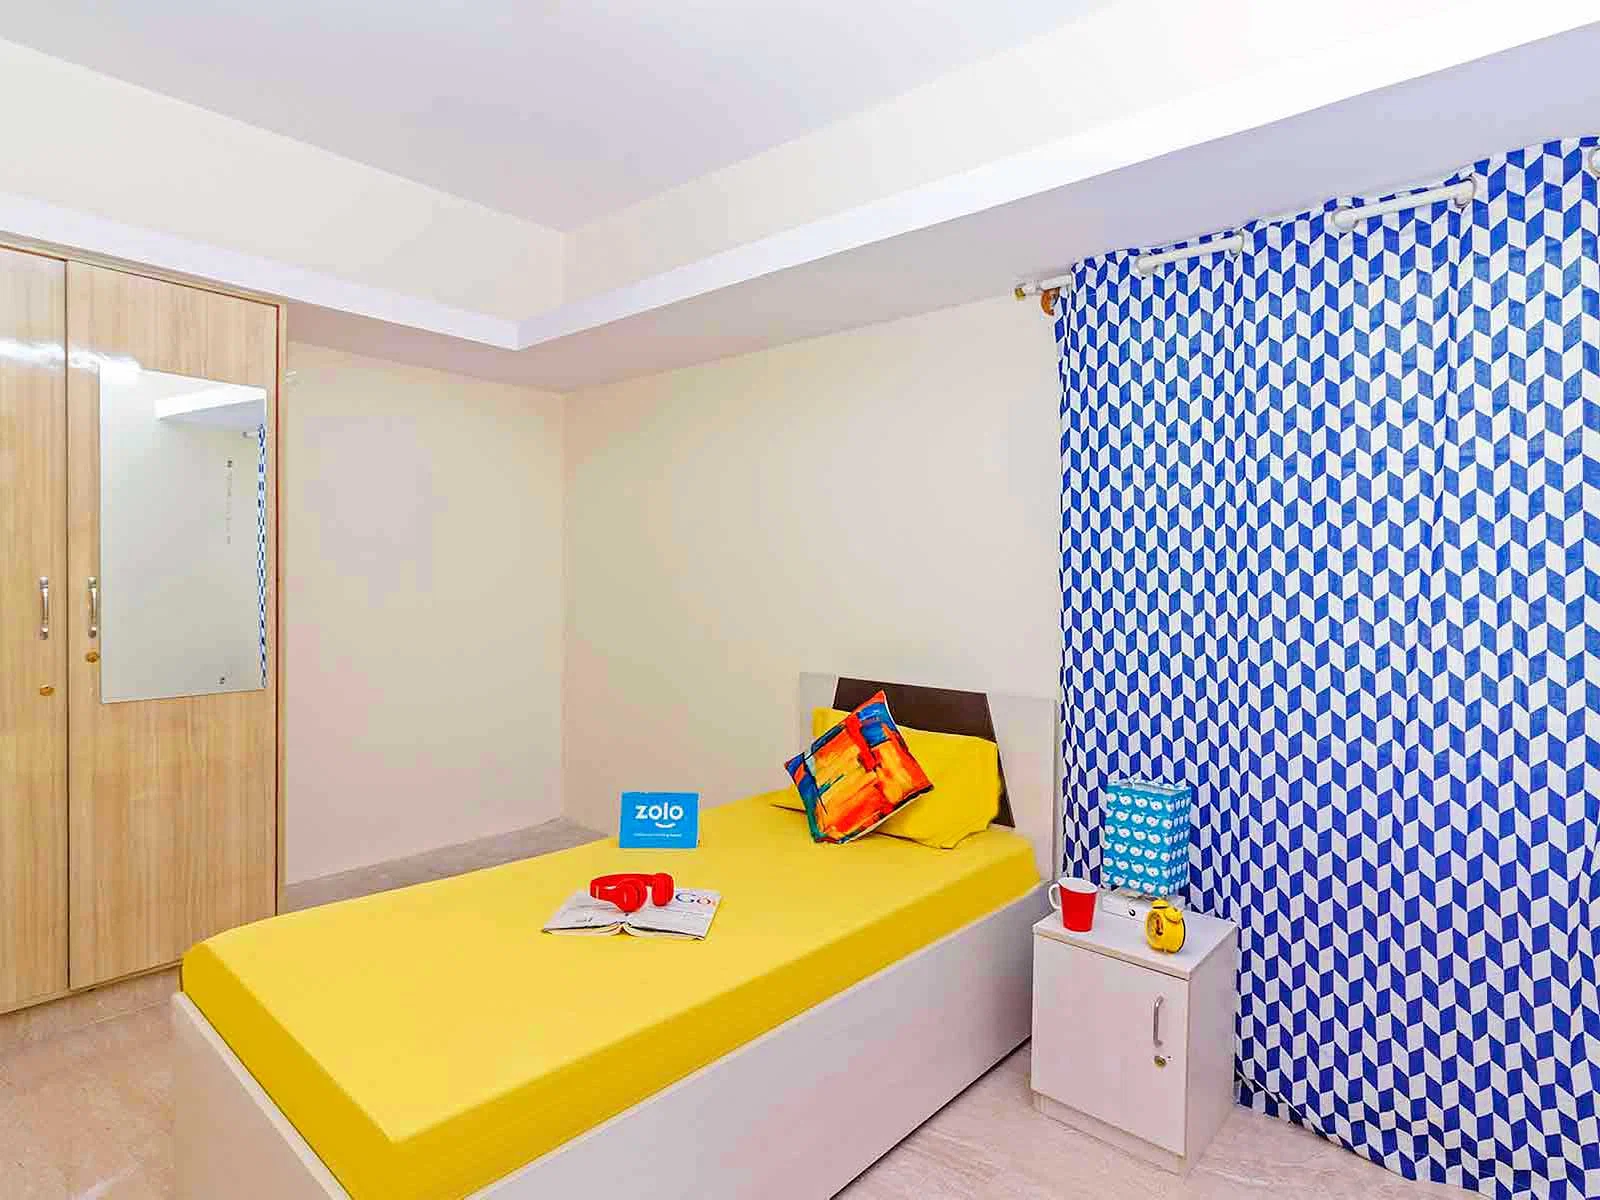 luxury pg rooms for working professionals unisex with private bathrooms in Bangalore-Zolo Dream House